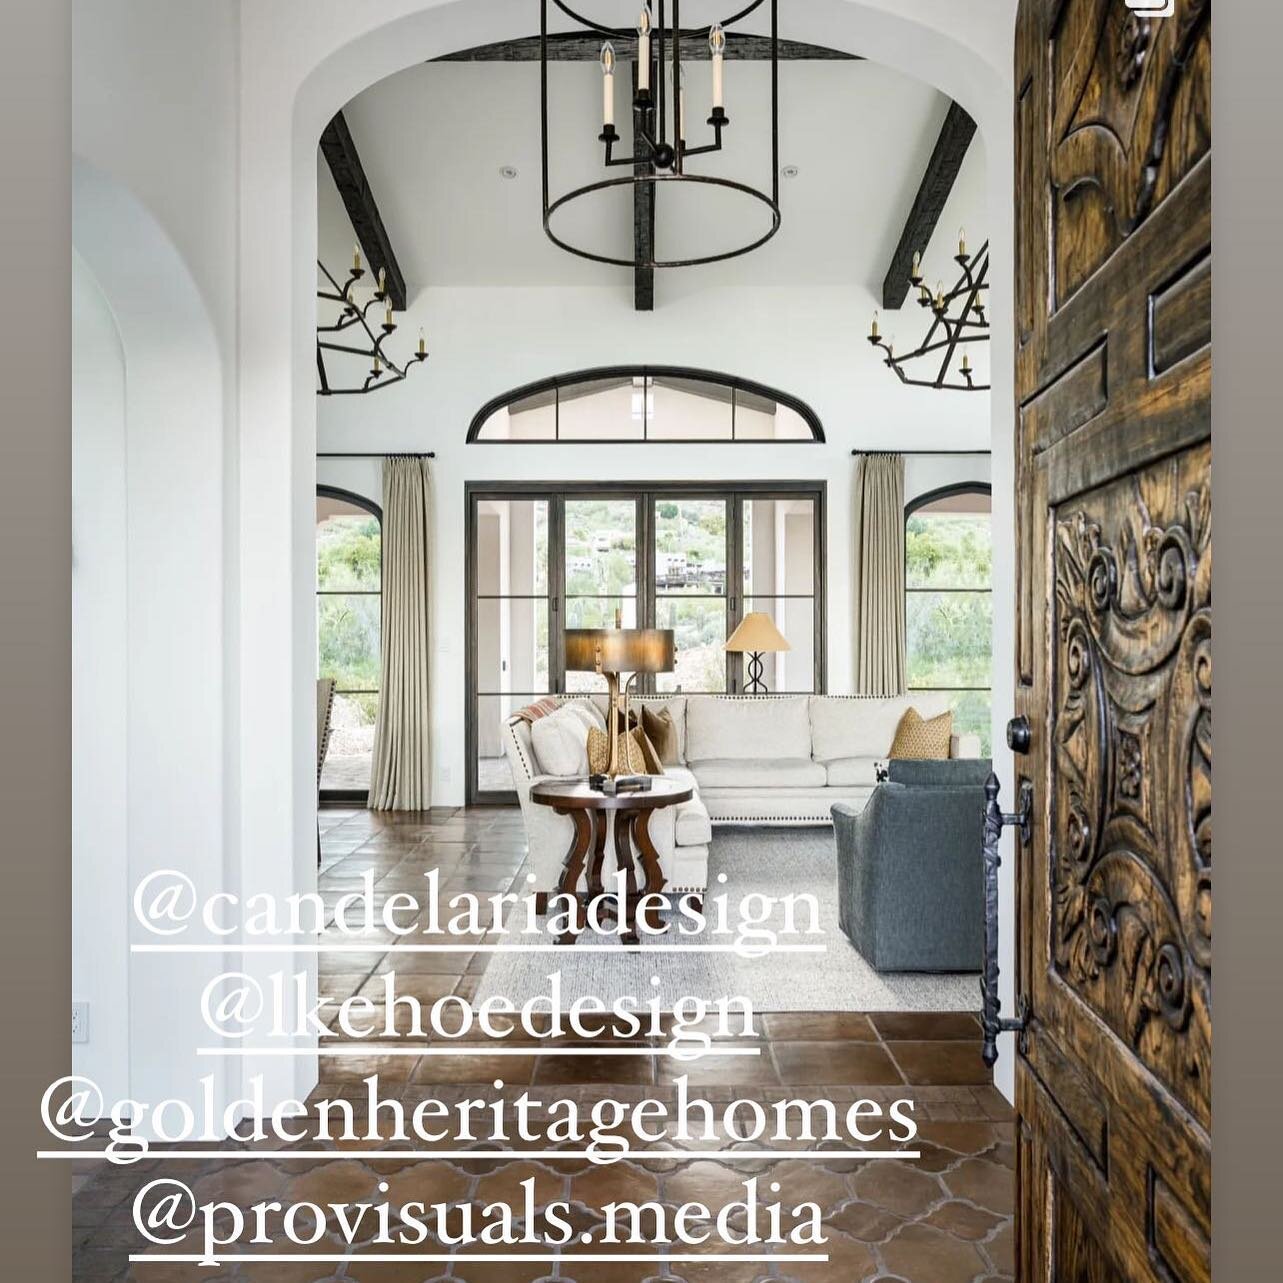 @provisuals.media Beautifully captured this hacienda style home. We created this stunning front door with hand carving as well as the carved vanity and hand forged iron hood. We worked with a very talented team @candelariadesign @goldenheritagehomes 